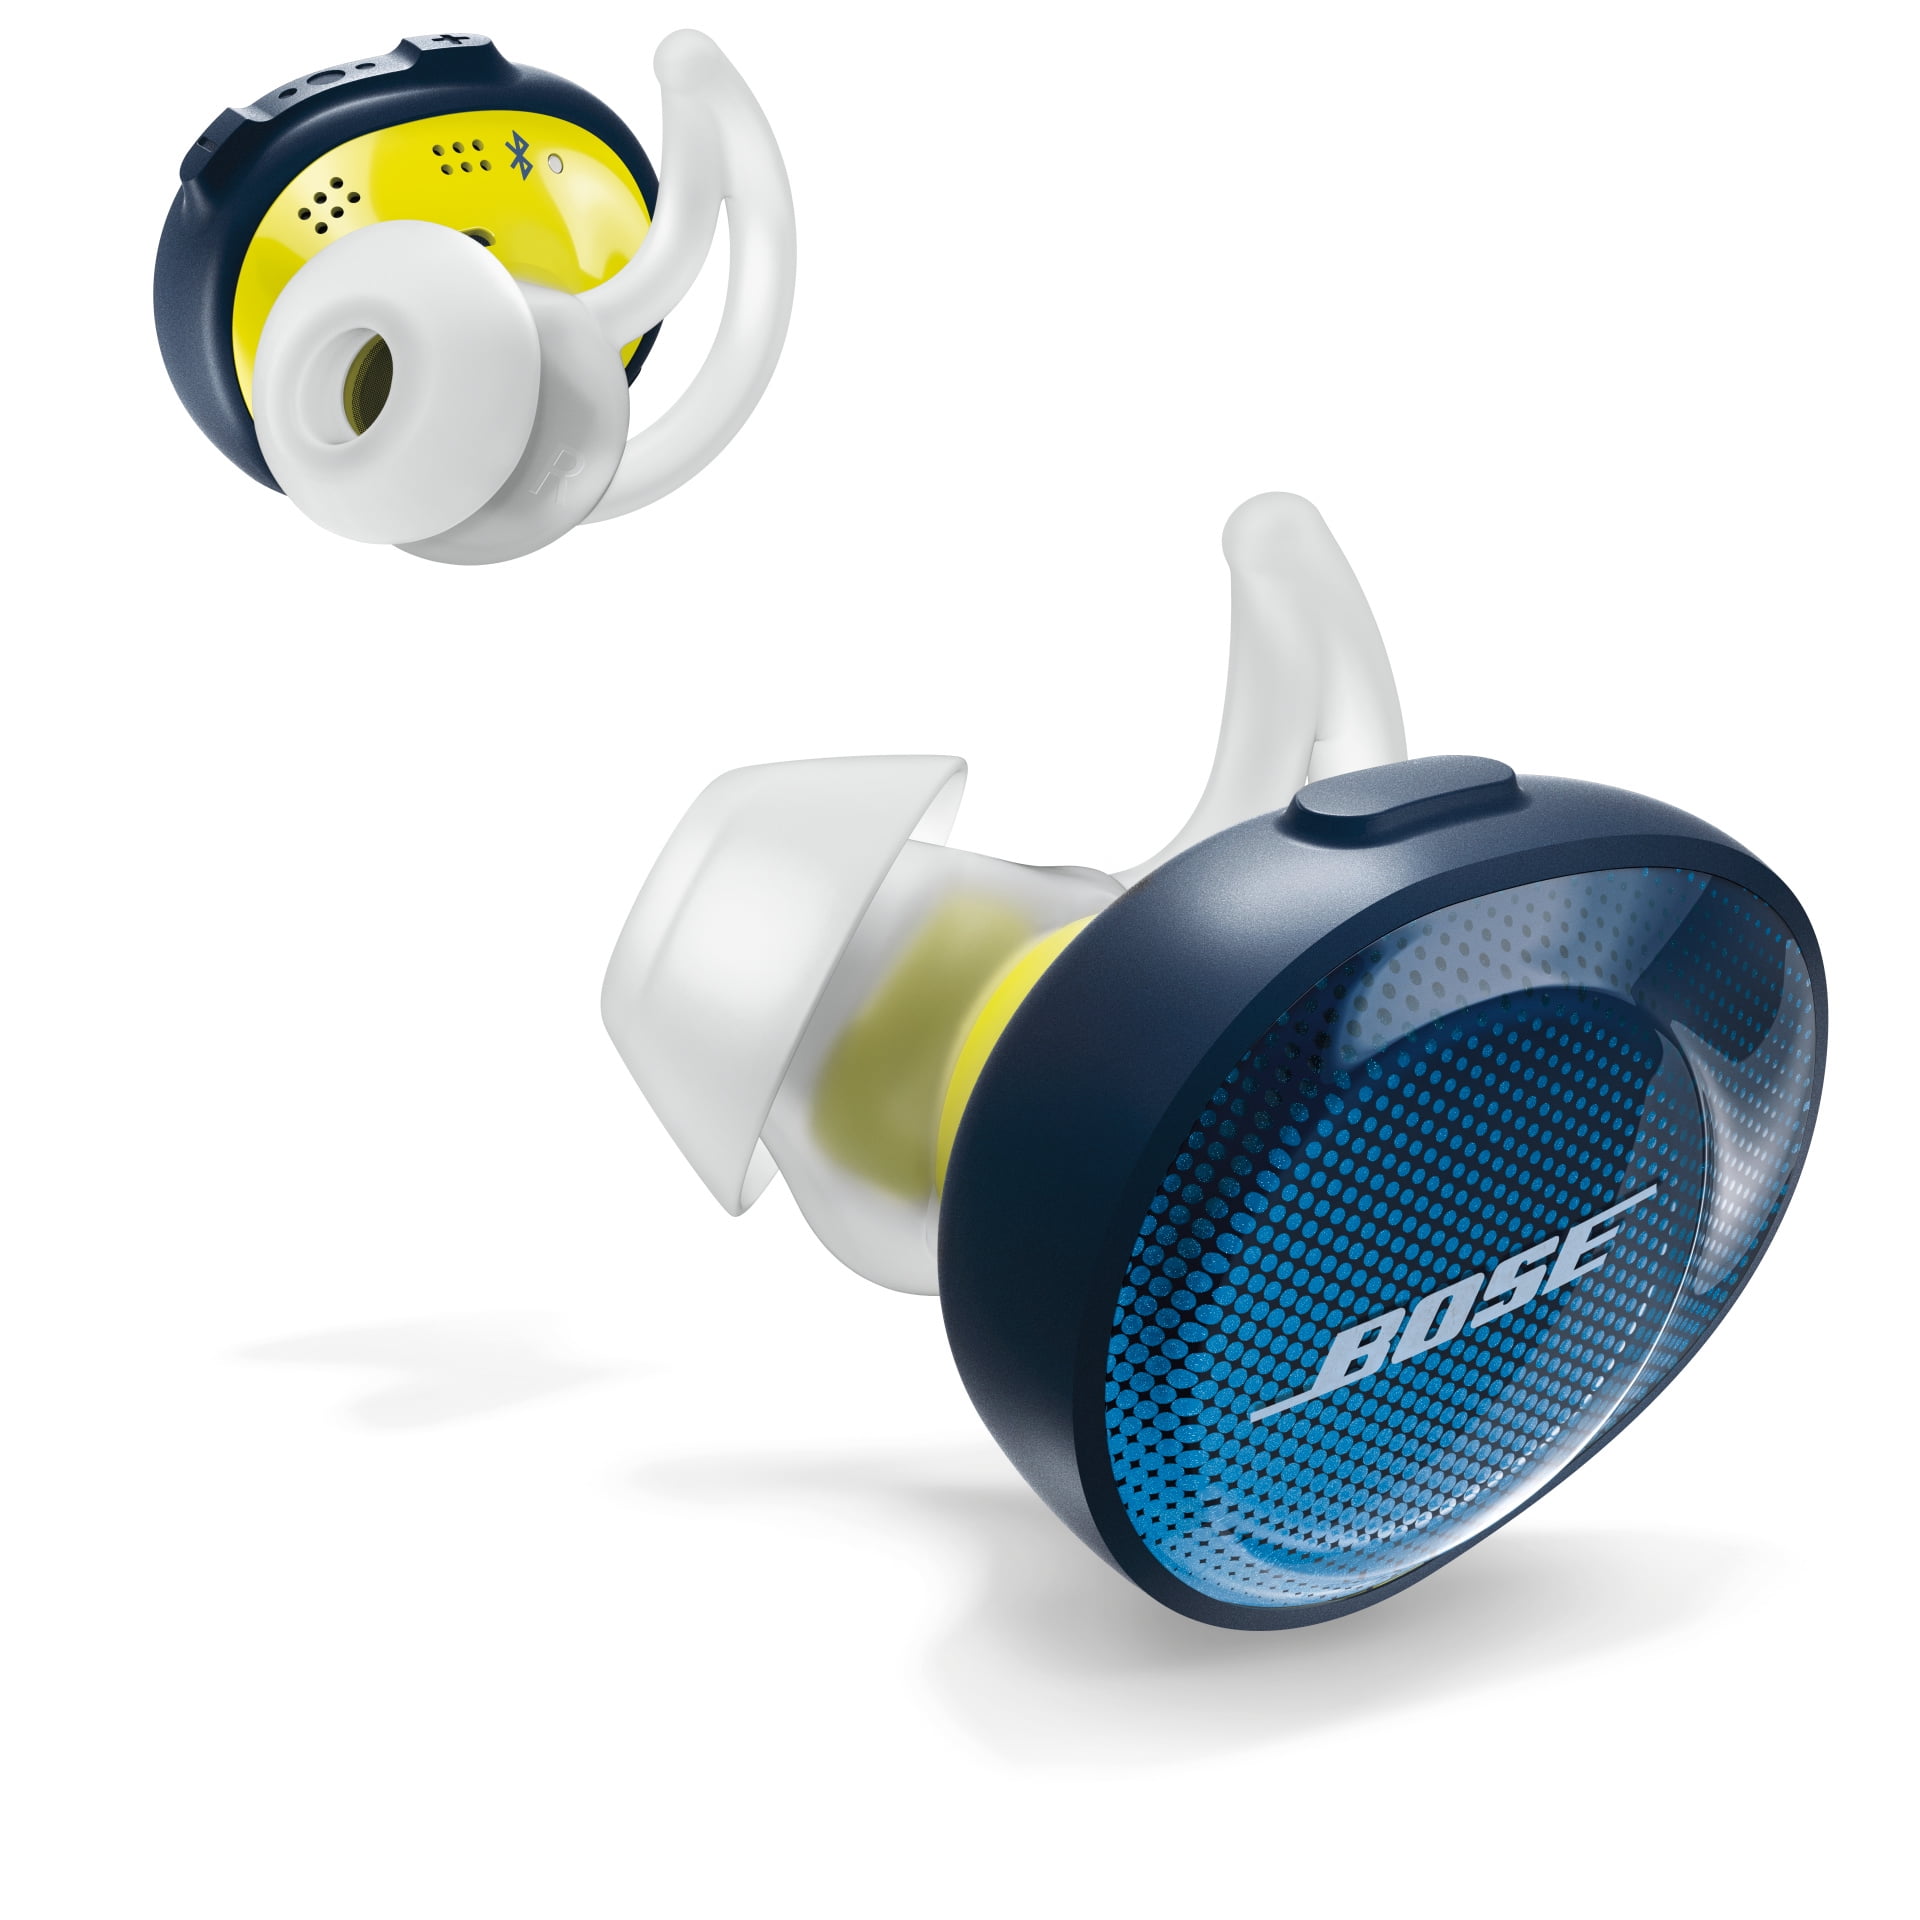 Bose SoundSport Free review: Good sound, but AirPods are better value